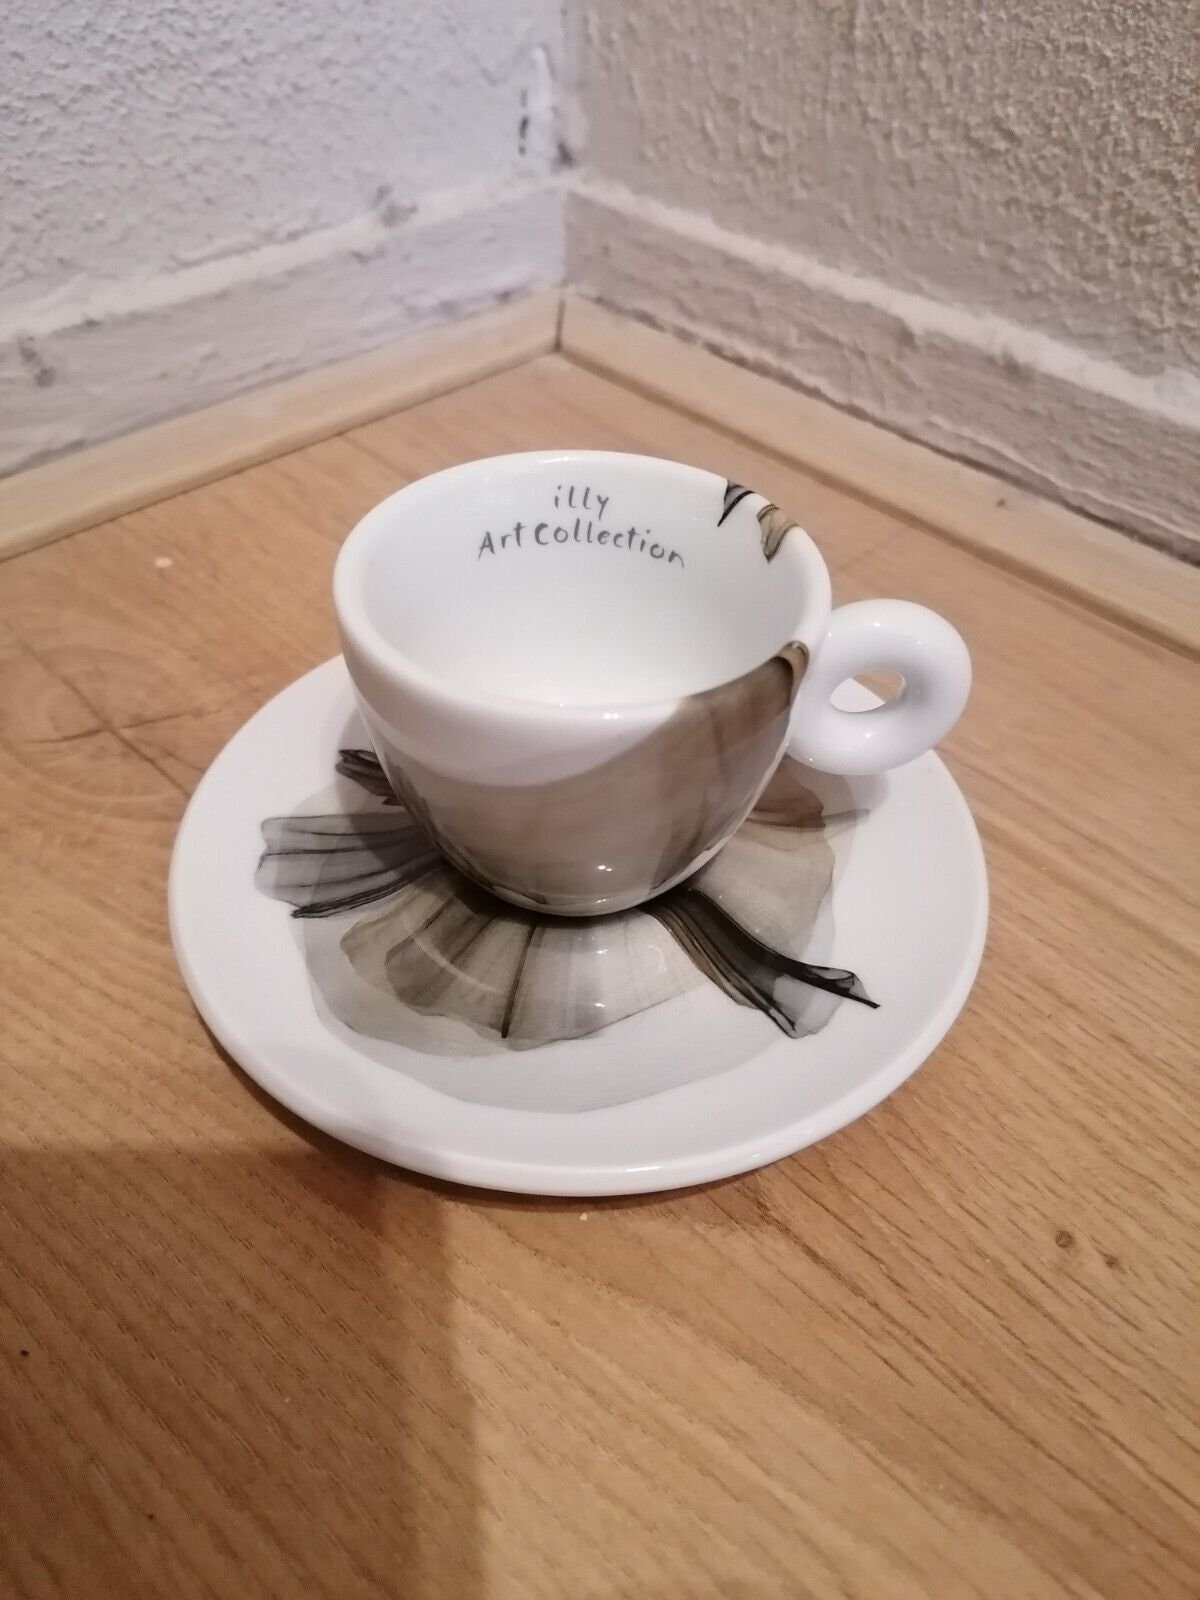 Illy Janis Kounellis 2005 Limited Edition "Broken Doll" Espresso Cup Set 